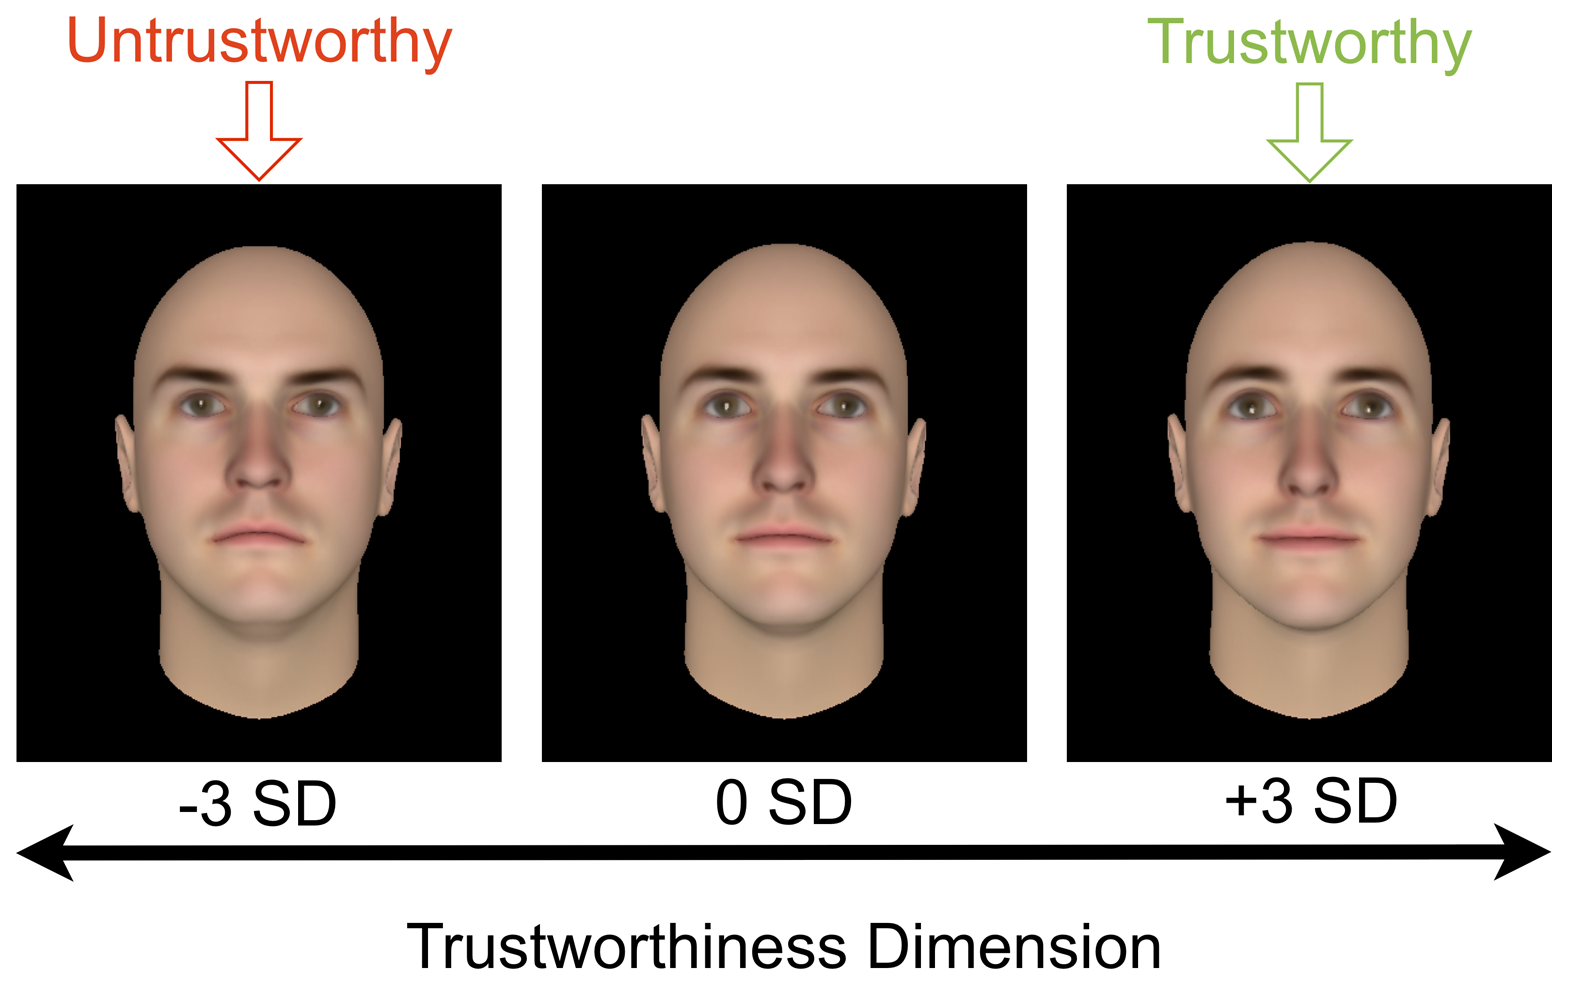 Untrustworthy faces are more likely to get the death sentence | Ars ...